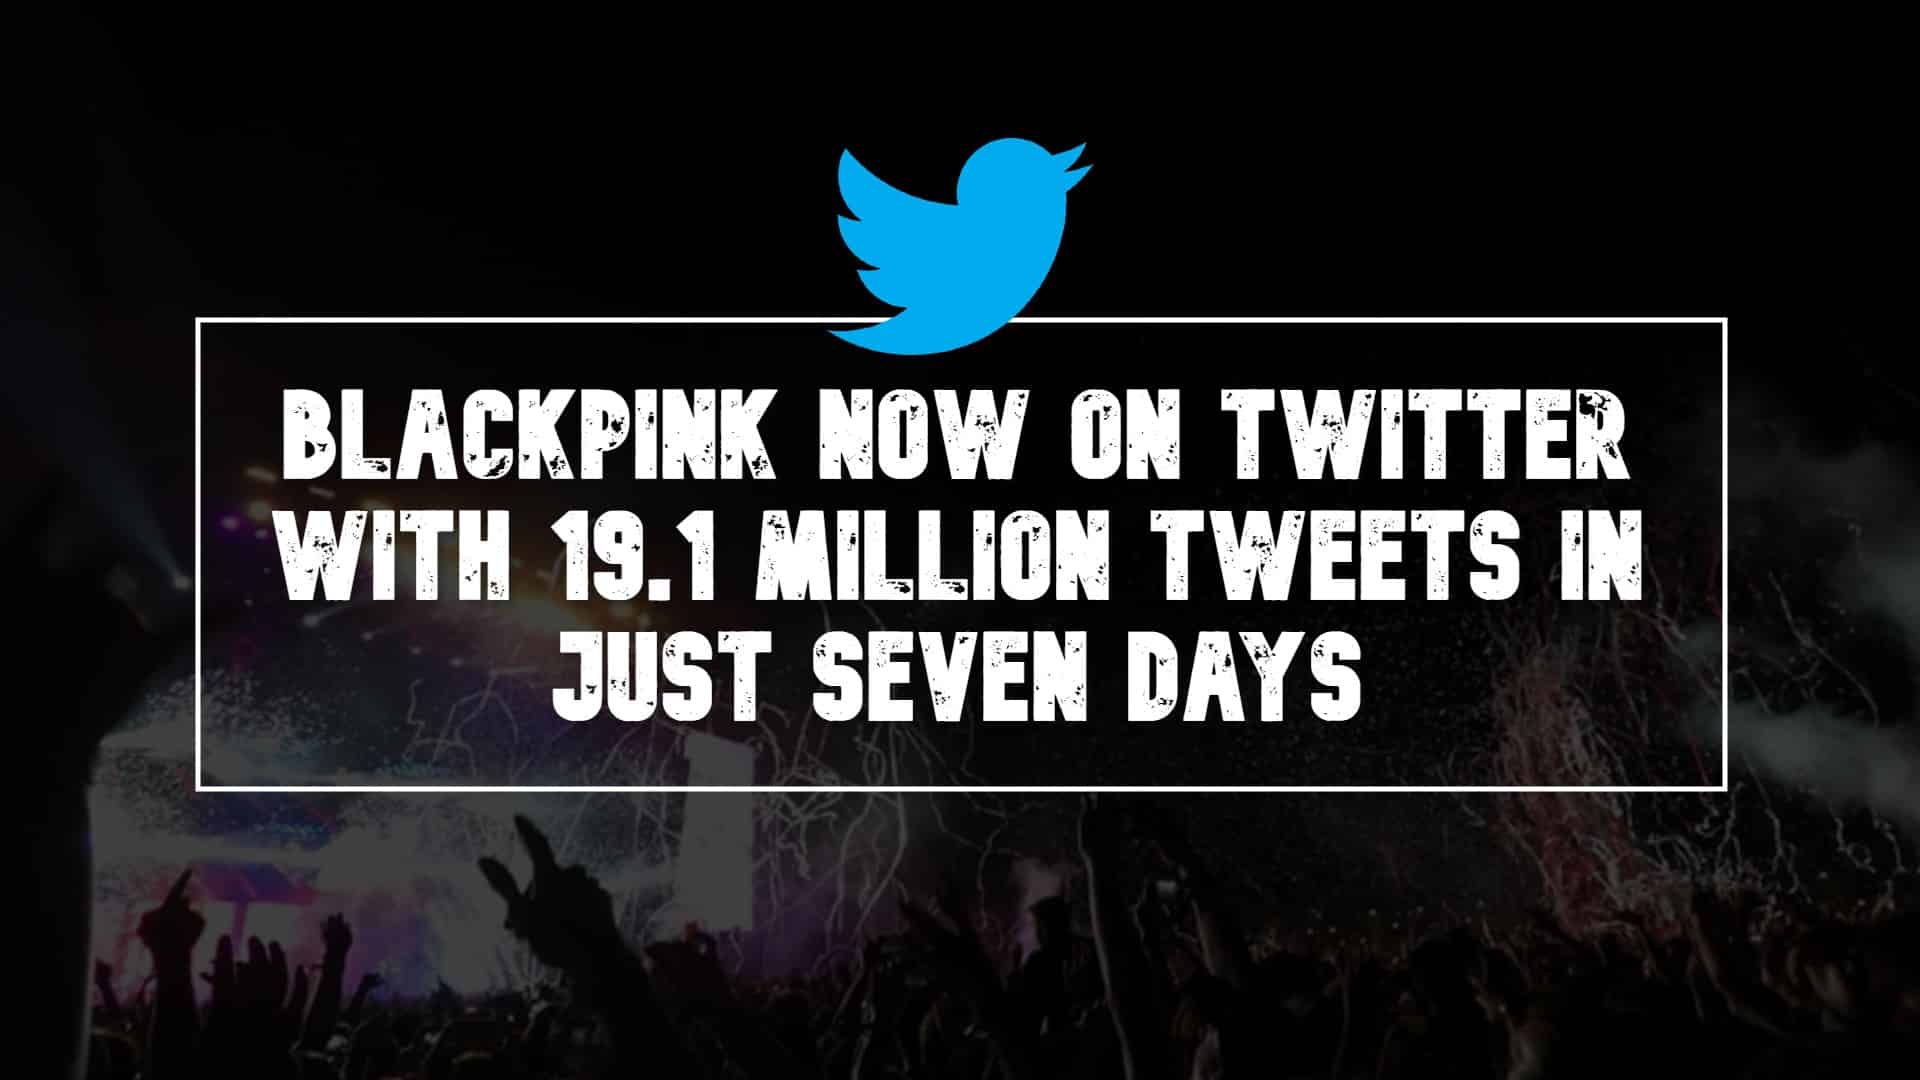 BLACKPINK Now On Twitter With 19.1 Million Tweets in Just Seven Days